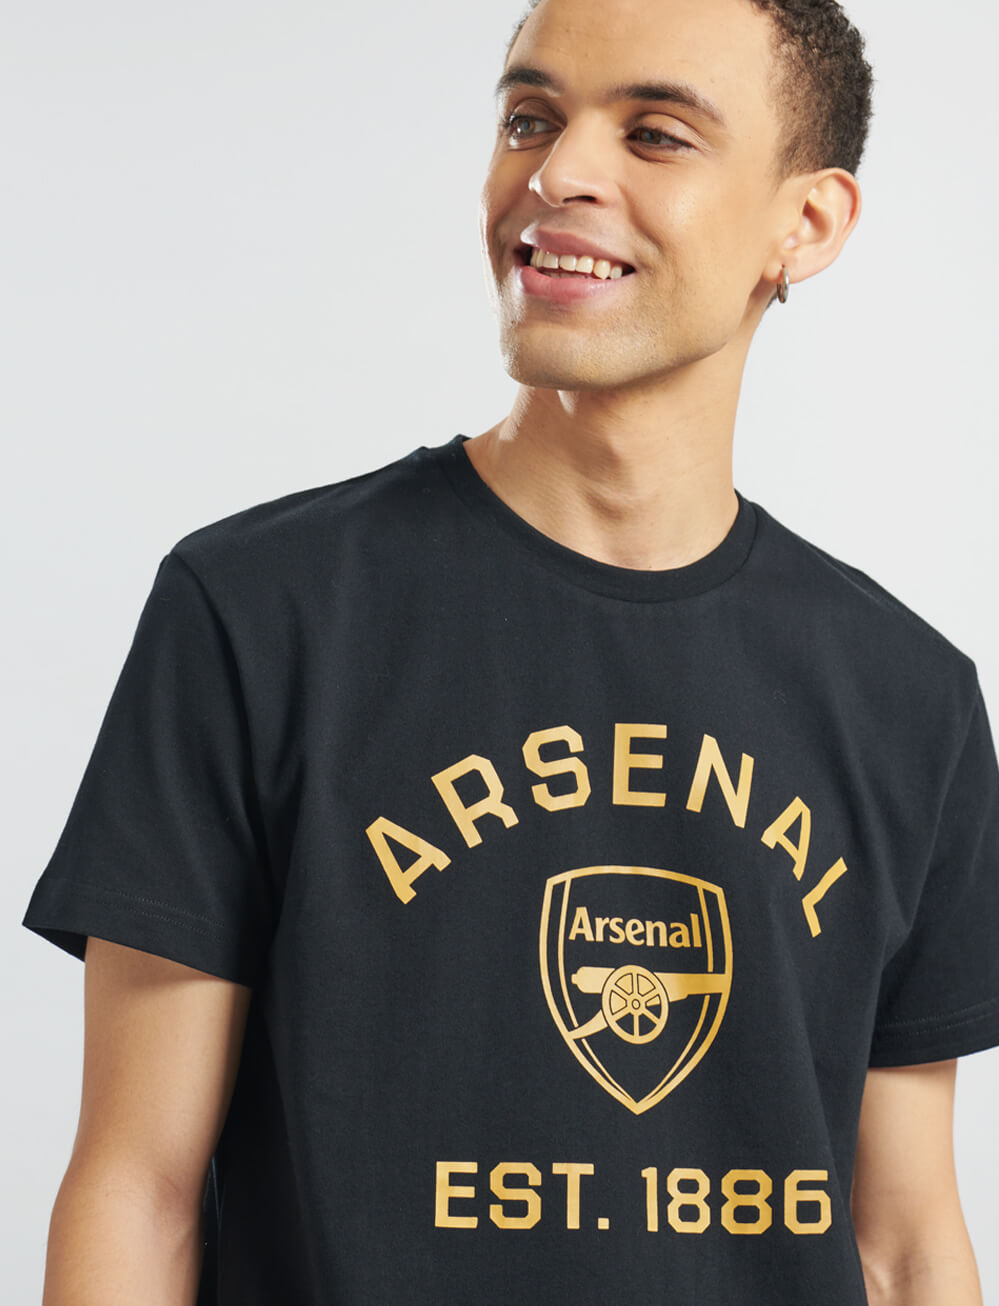 Official Arsenal Graphic T-Shirt - Black - The World Football Store